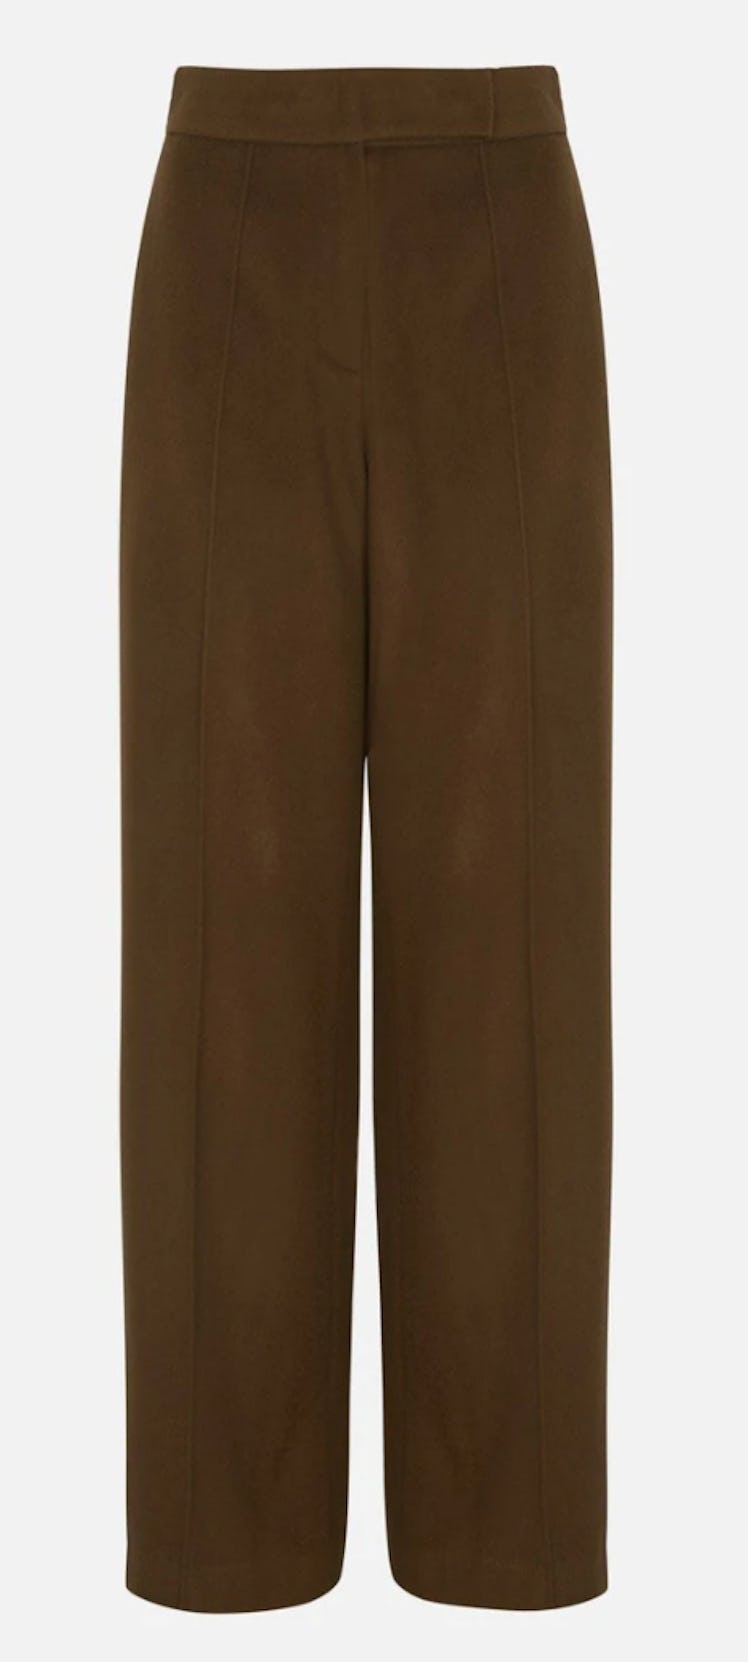 The Frankie Shop Danu Belted Trousers 